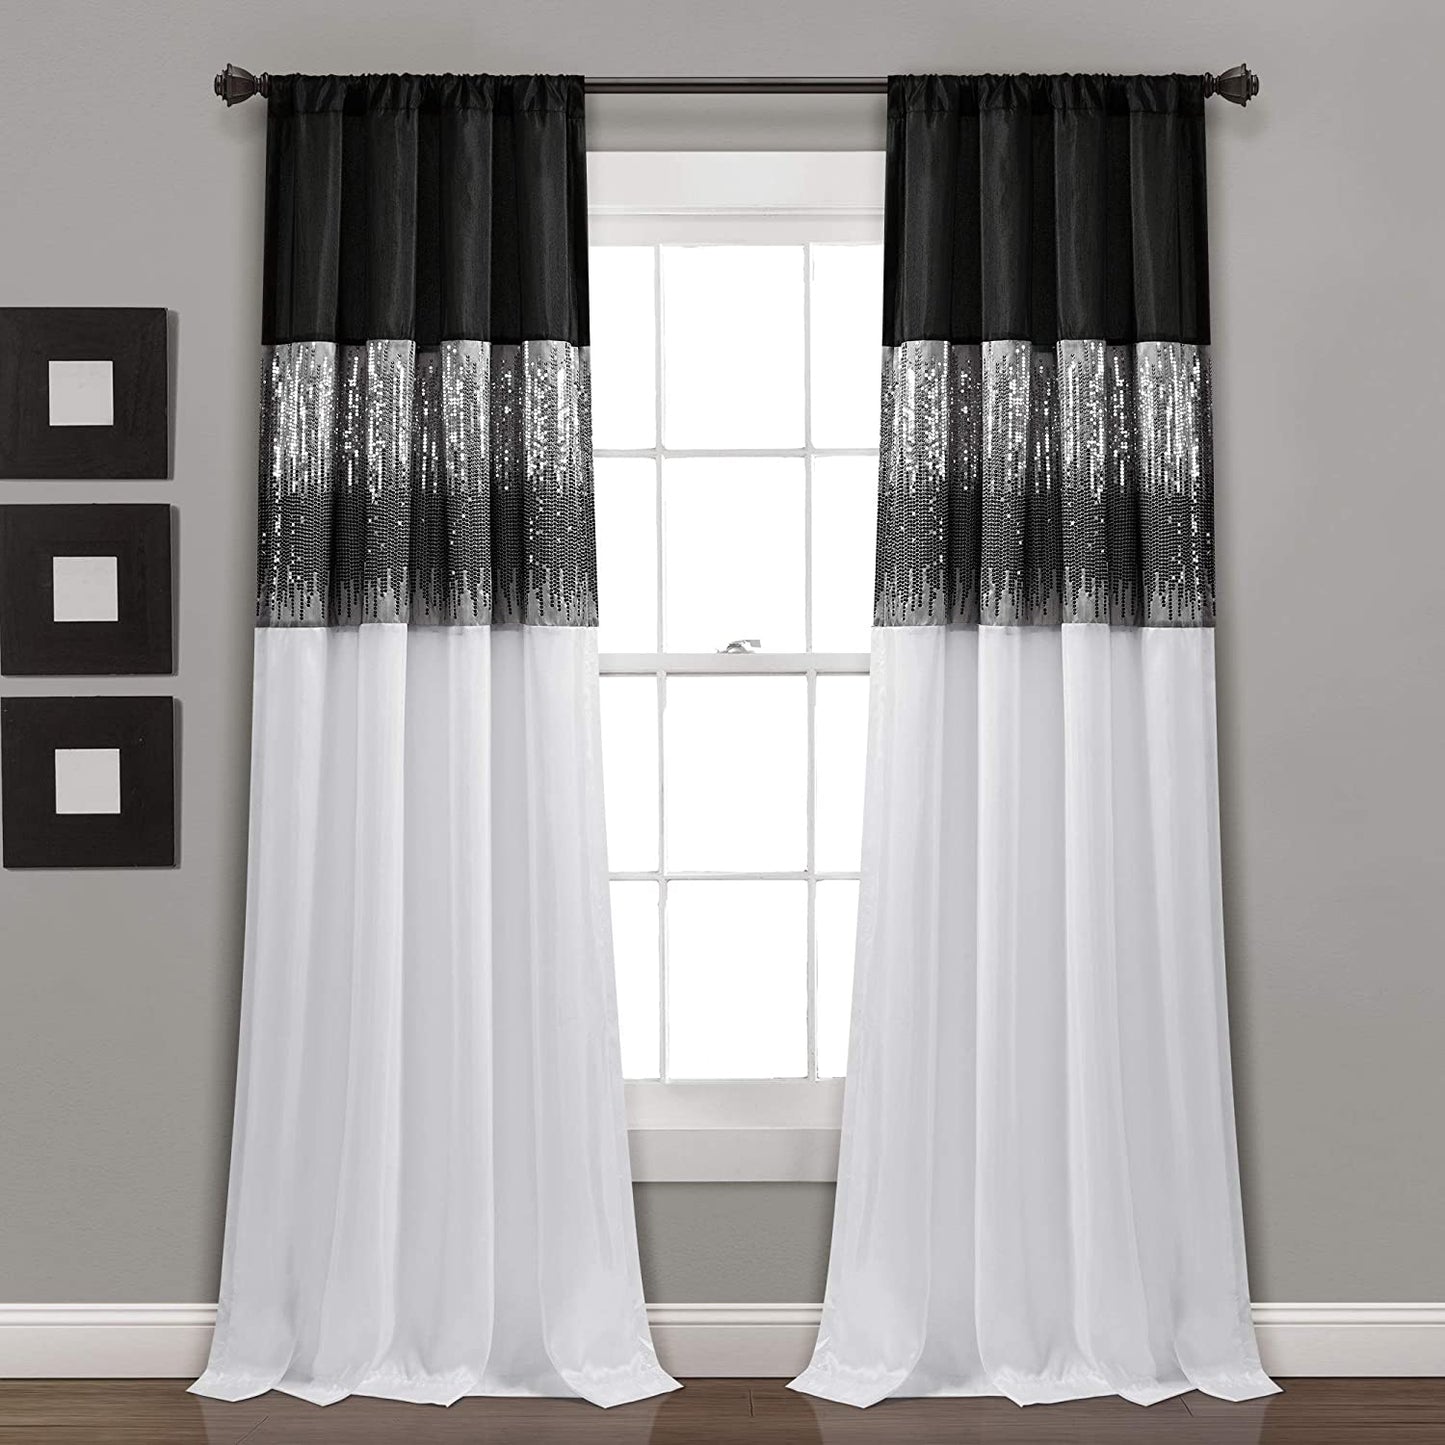 Night Sky Window Curtain Panel for Living, Bedroom, Dining Room (Single Curtain), 42"W X 84"L, Black & White